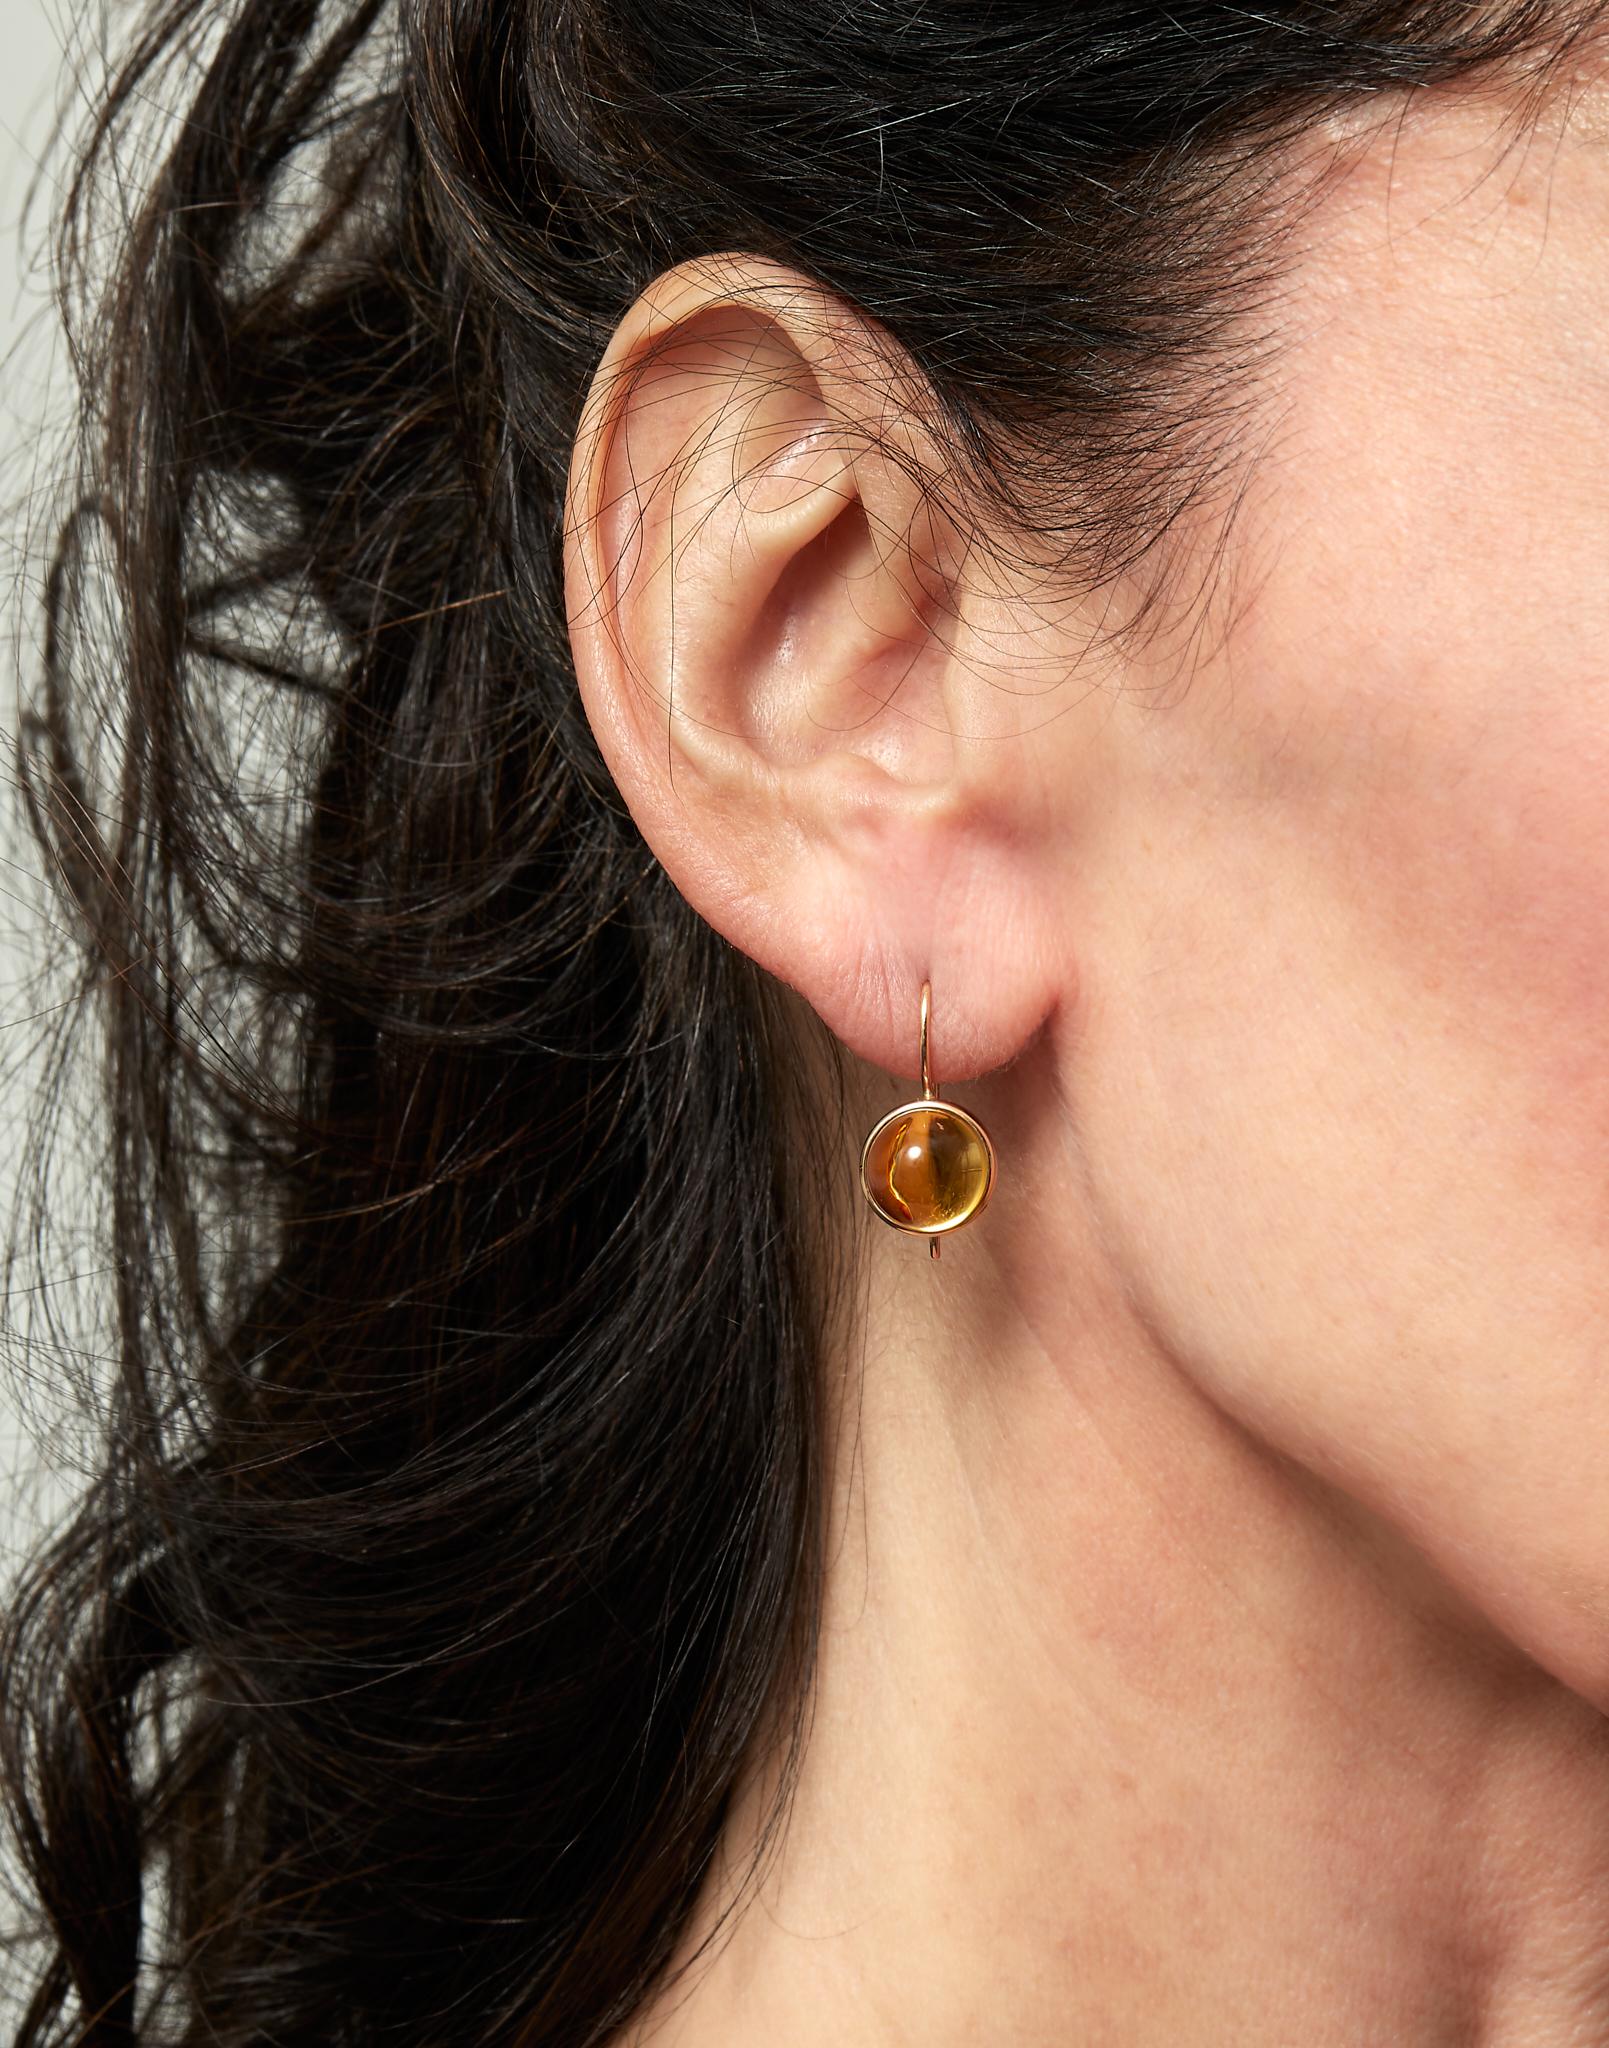 Designed by Eva Soussana, artist and founder of Hera-Jewellery, these elegant and refined drop earrings are from the 